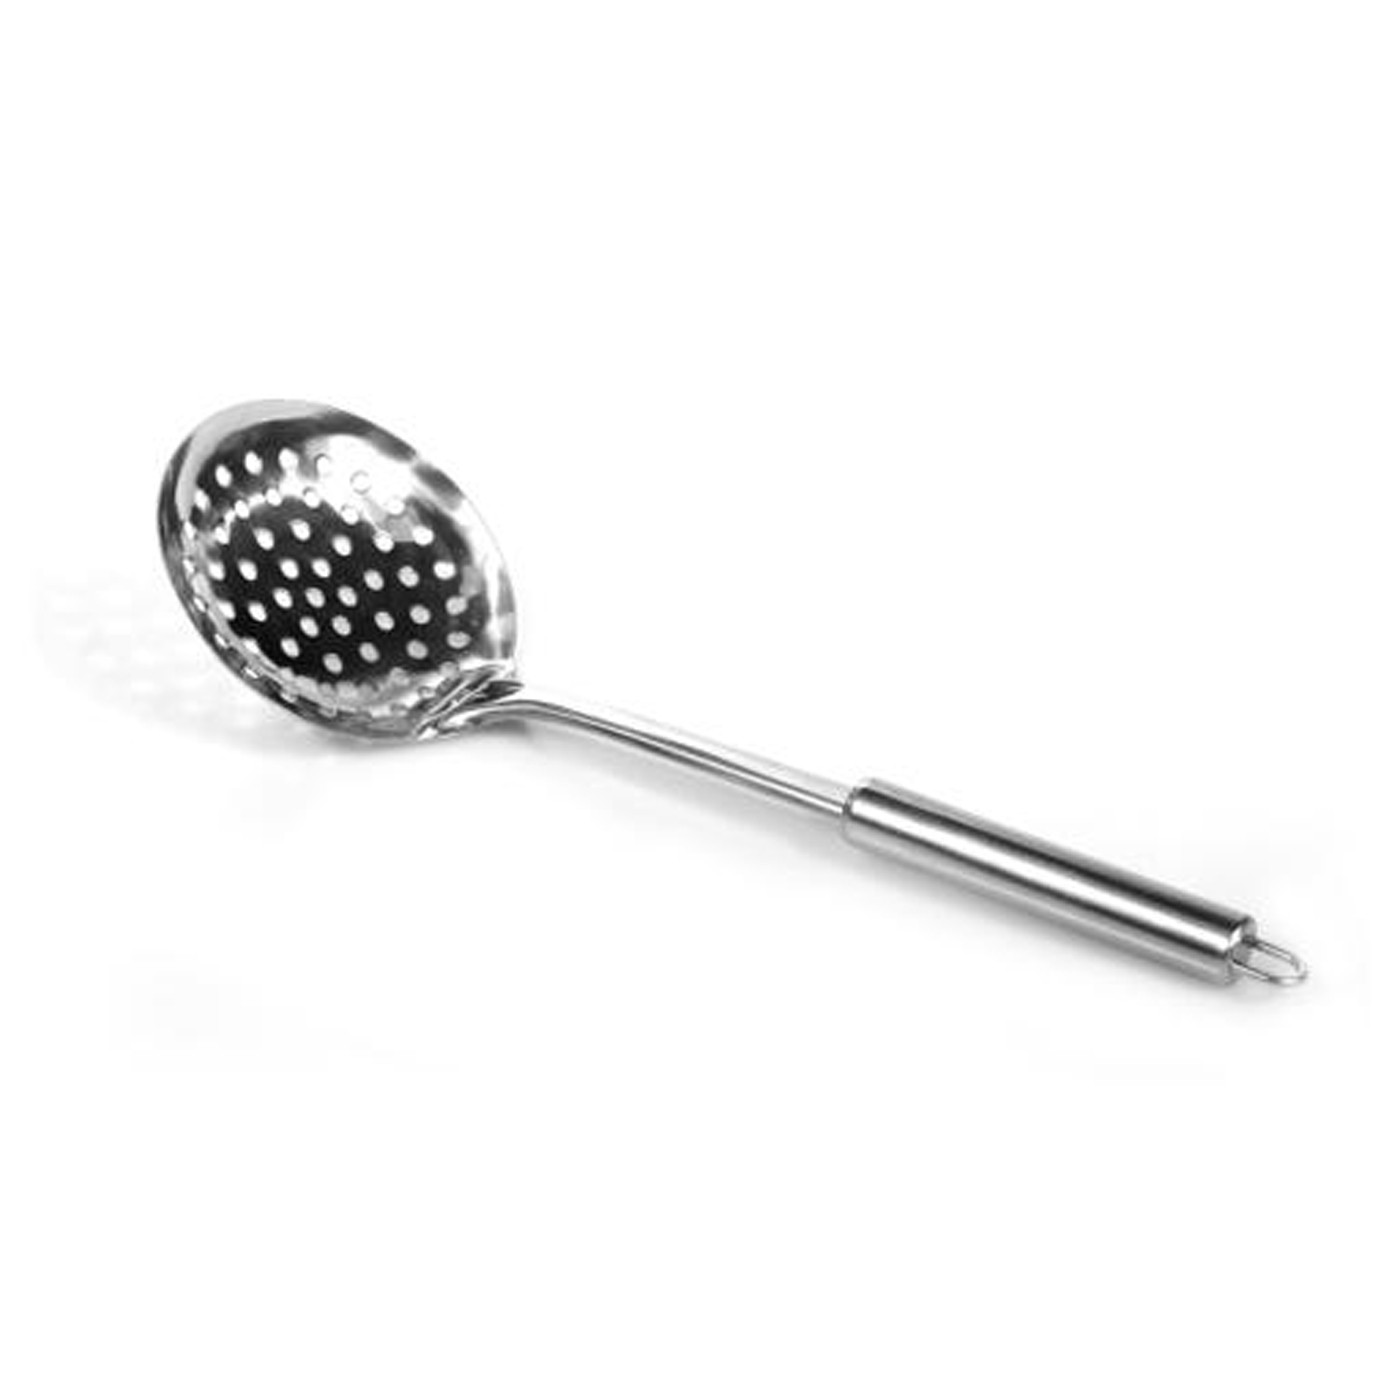 Kuber Industries Stainless Steel Jhara/Skimmer/Strainer Steel Frying Spoon/deep Fry for Kitchen-Pack of 2 (Silver)